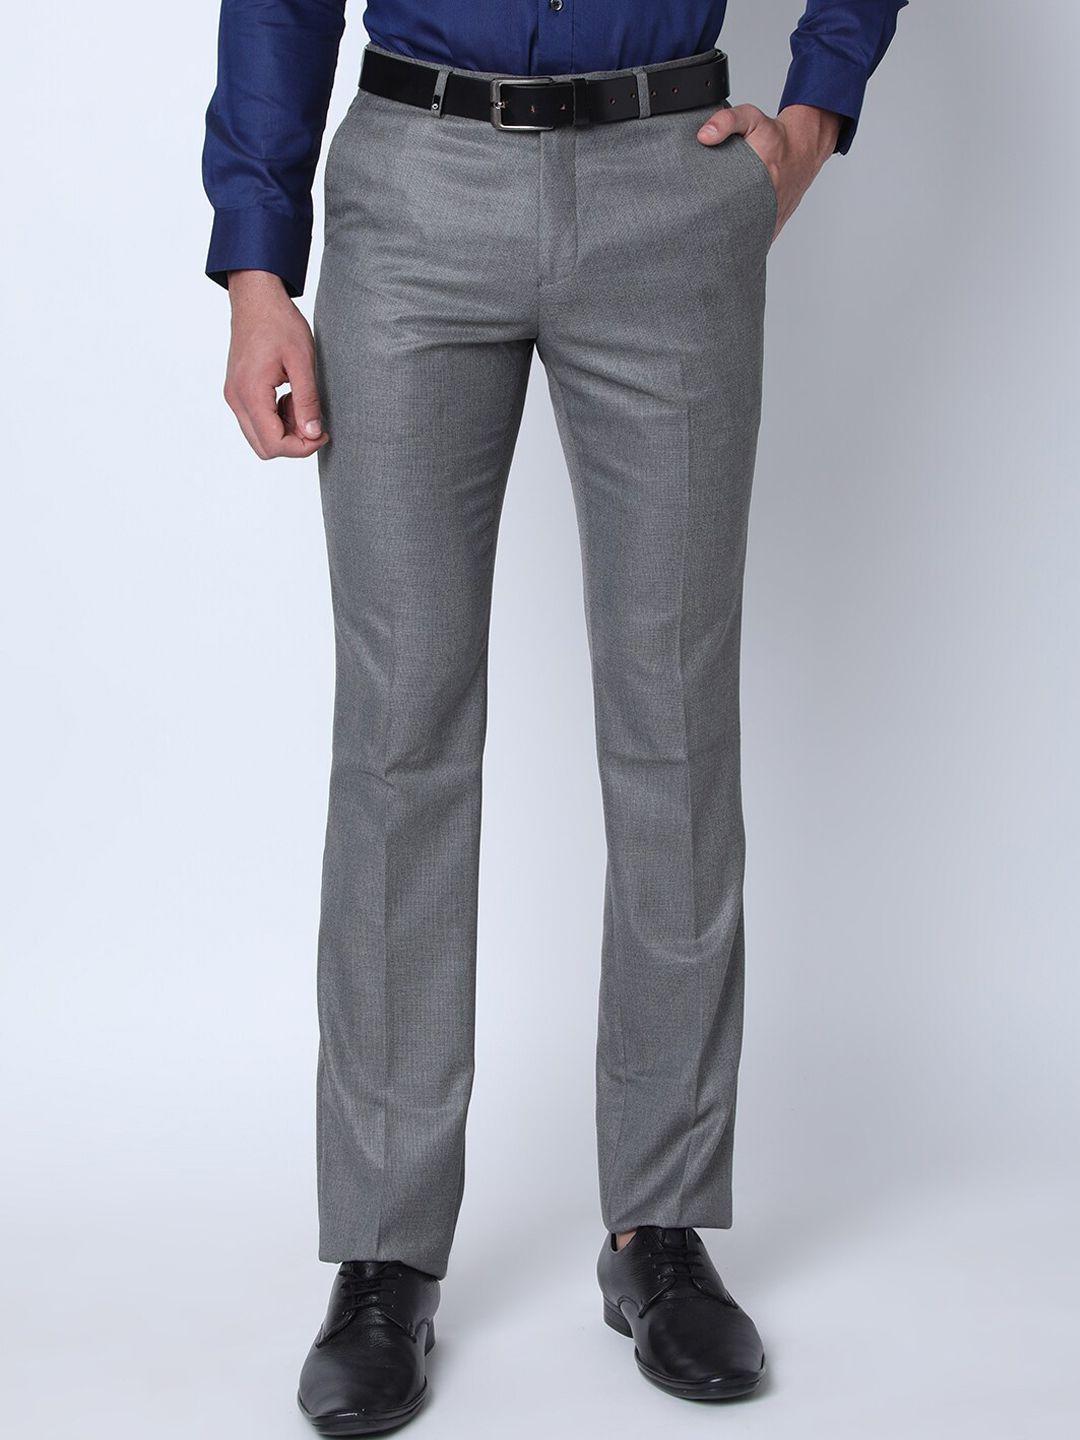 oxemberg-men-slim-fit-mid-rise-formal-trousers